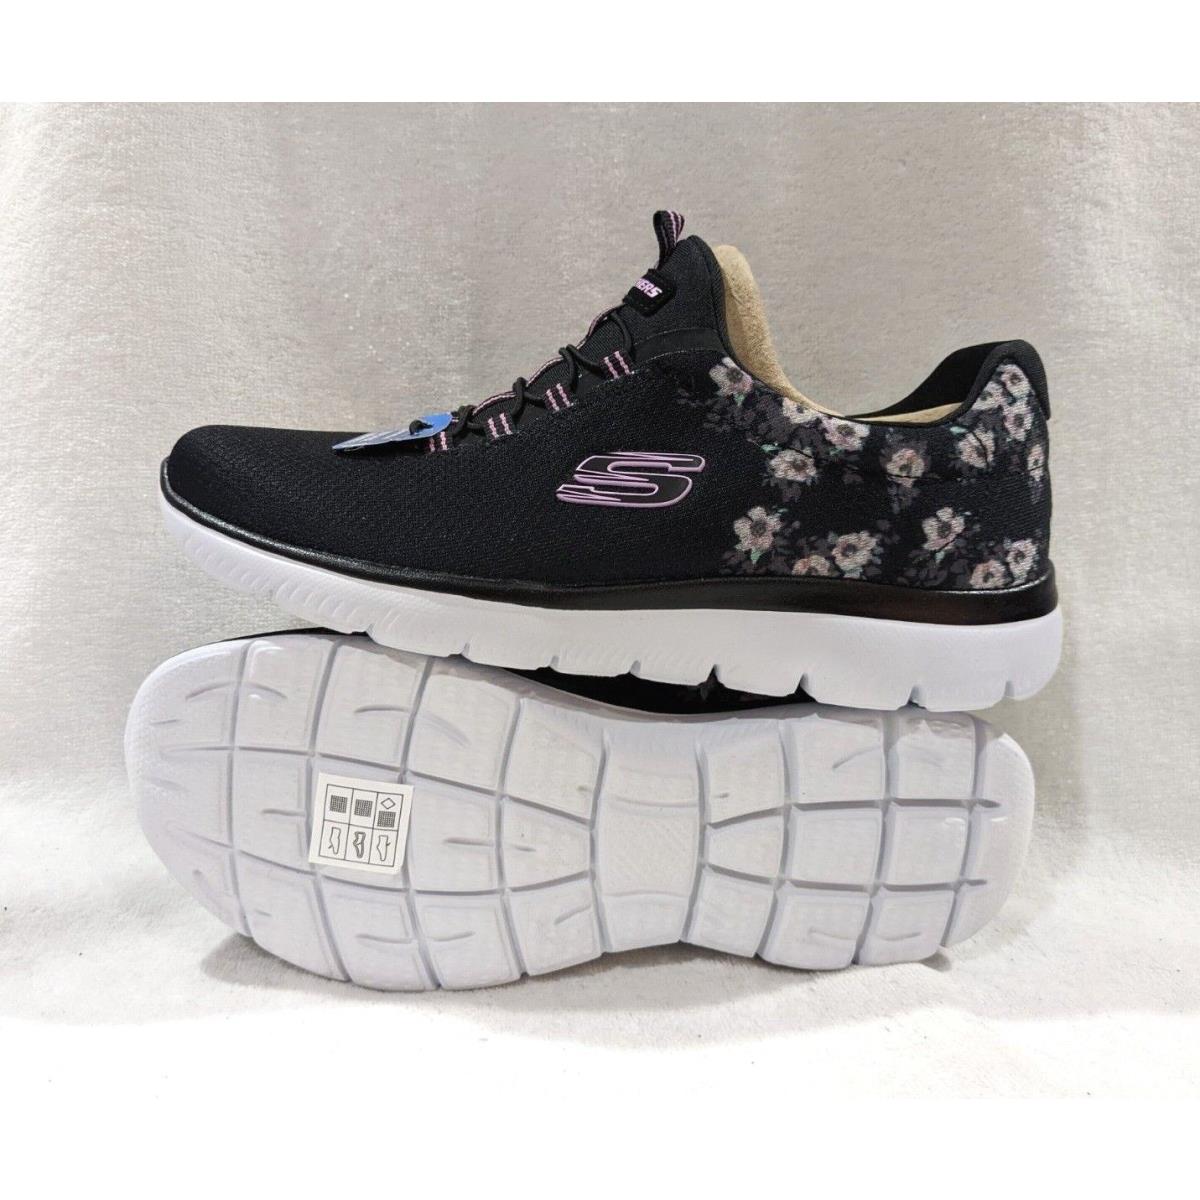 Skechers shoes Summits Perfect Blossom - Black 0